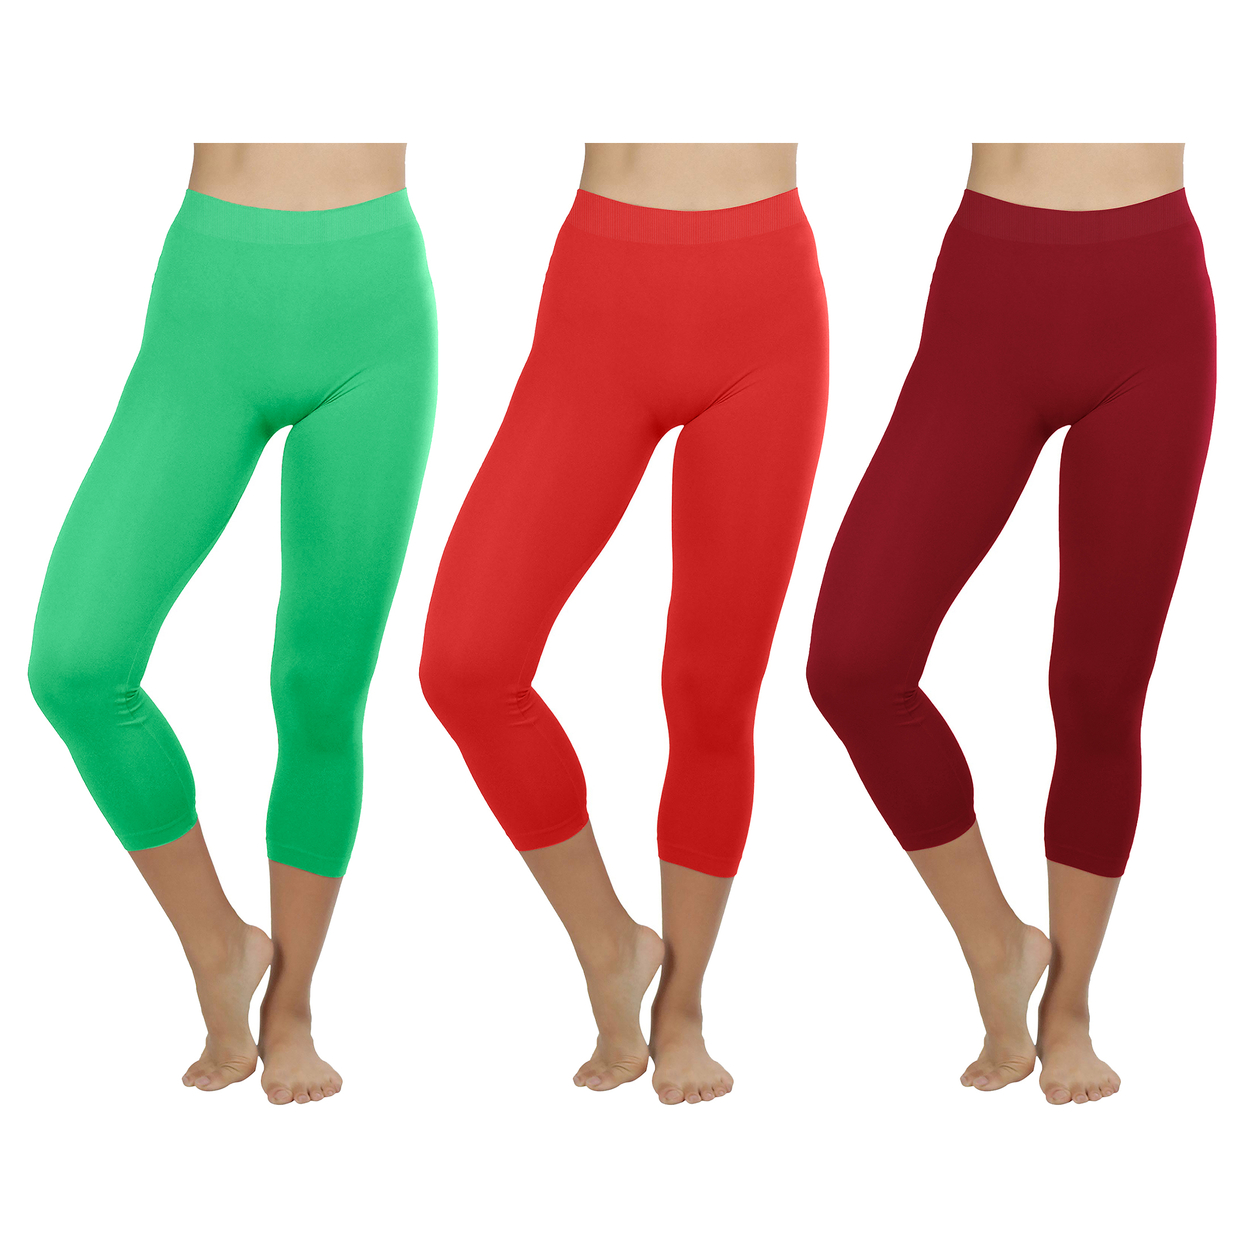 Women's Ultra Soft High Waisted Smooth Stretch Active Yoga Capri Leggings - Red, X-large